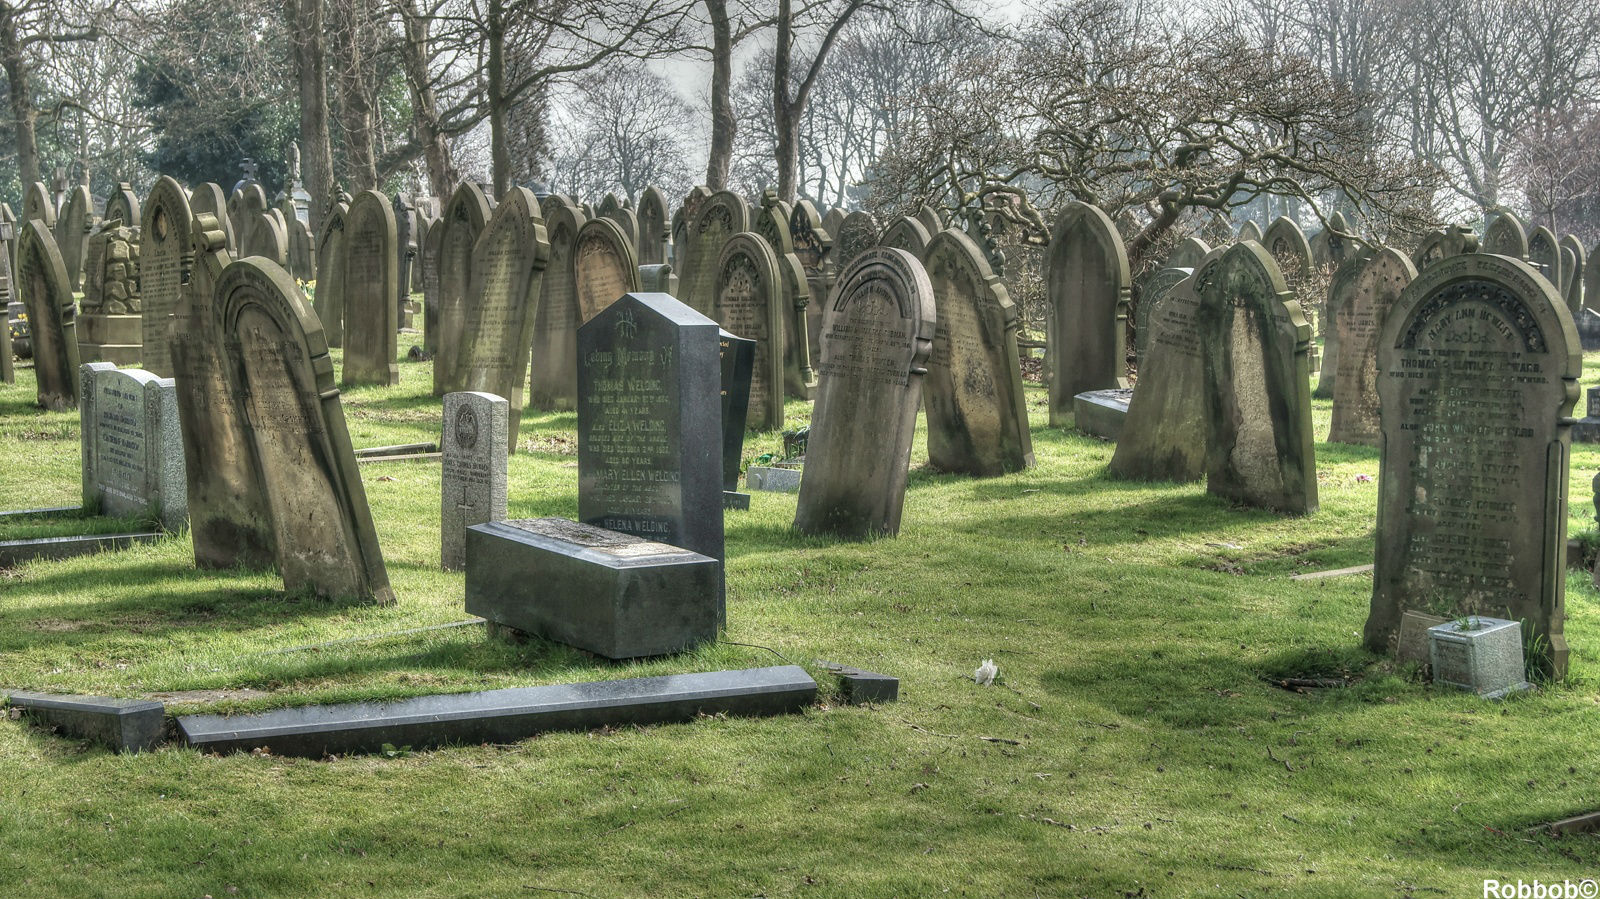 From the archives: Man fined for pretending to be ghost in cemetery